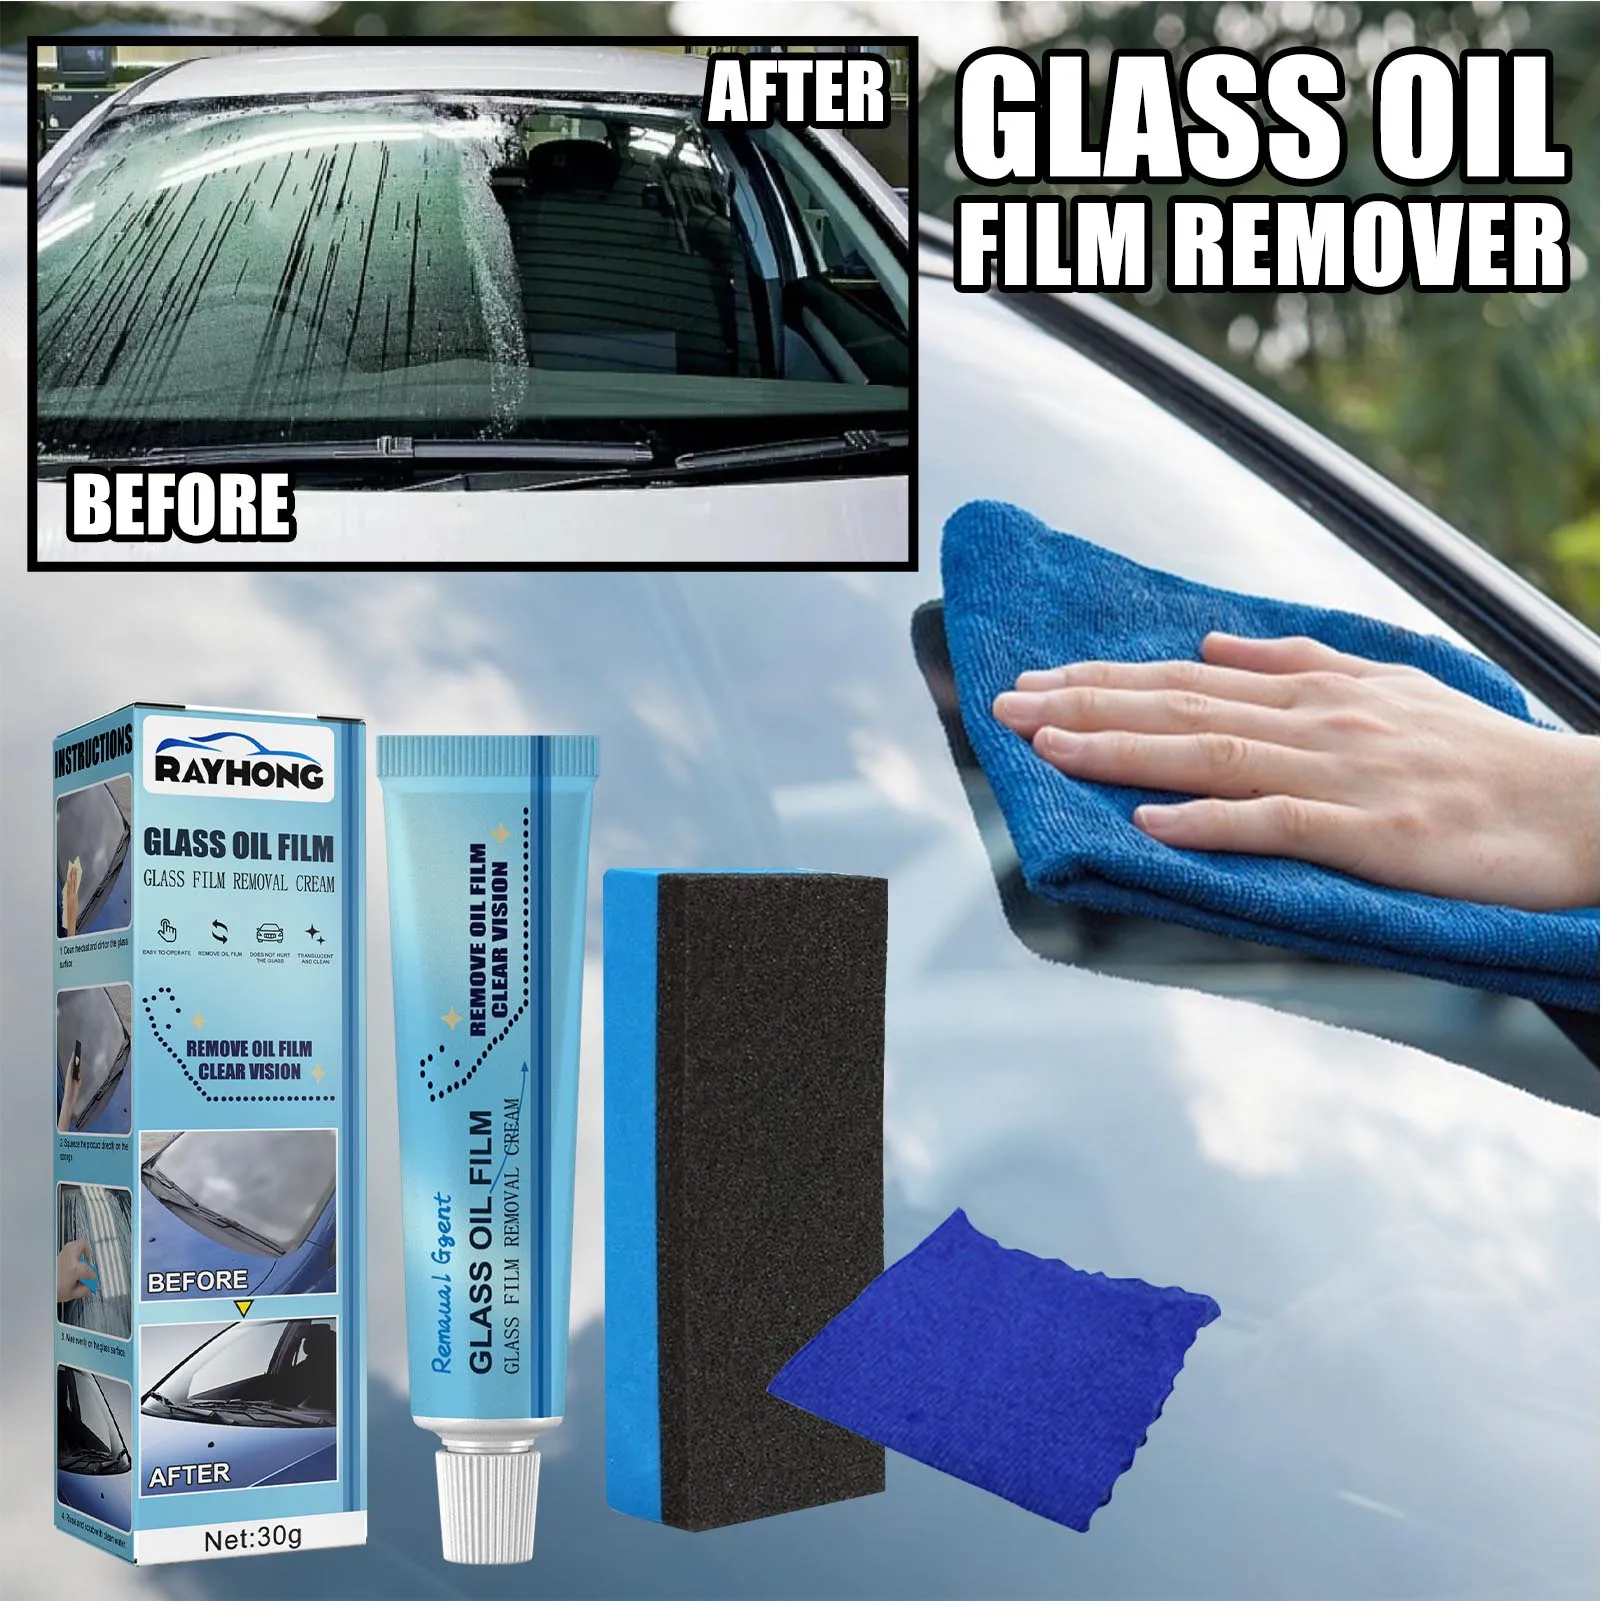 30g Glass Oil Film Removing Car Windshield Oil Film Clean Polish Paste Remover For Bathroom Car Window Front Windshield